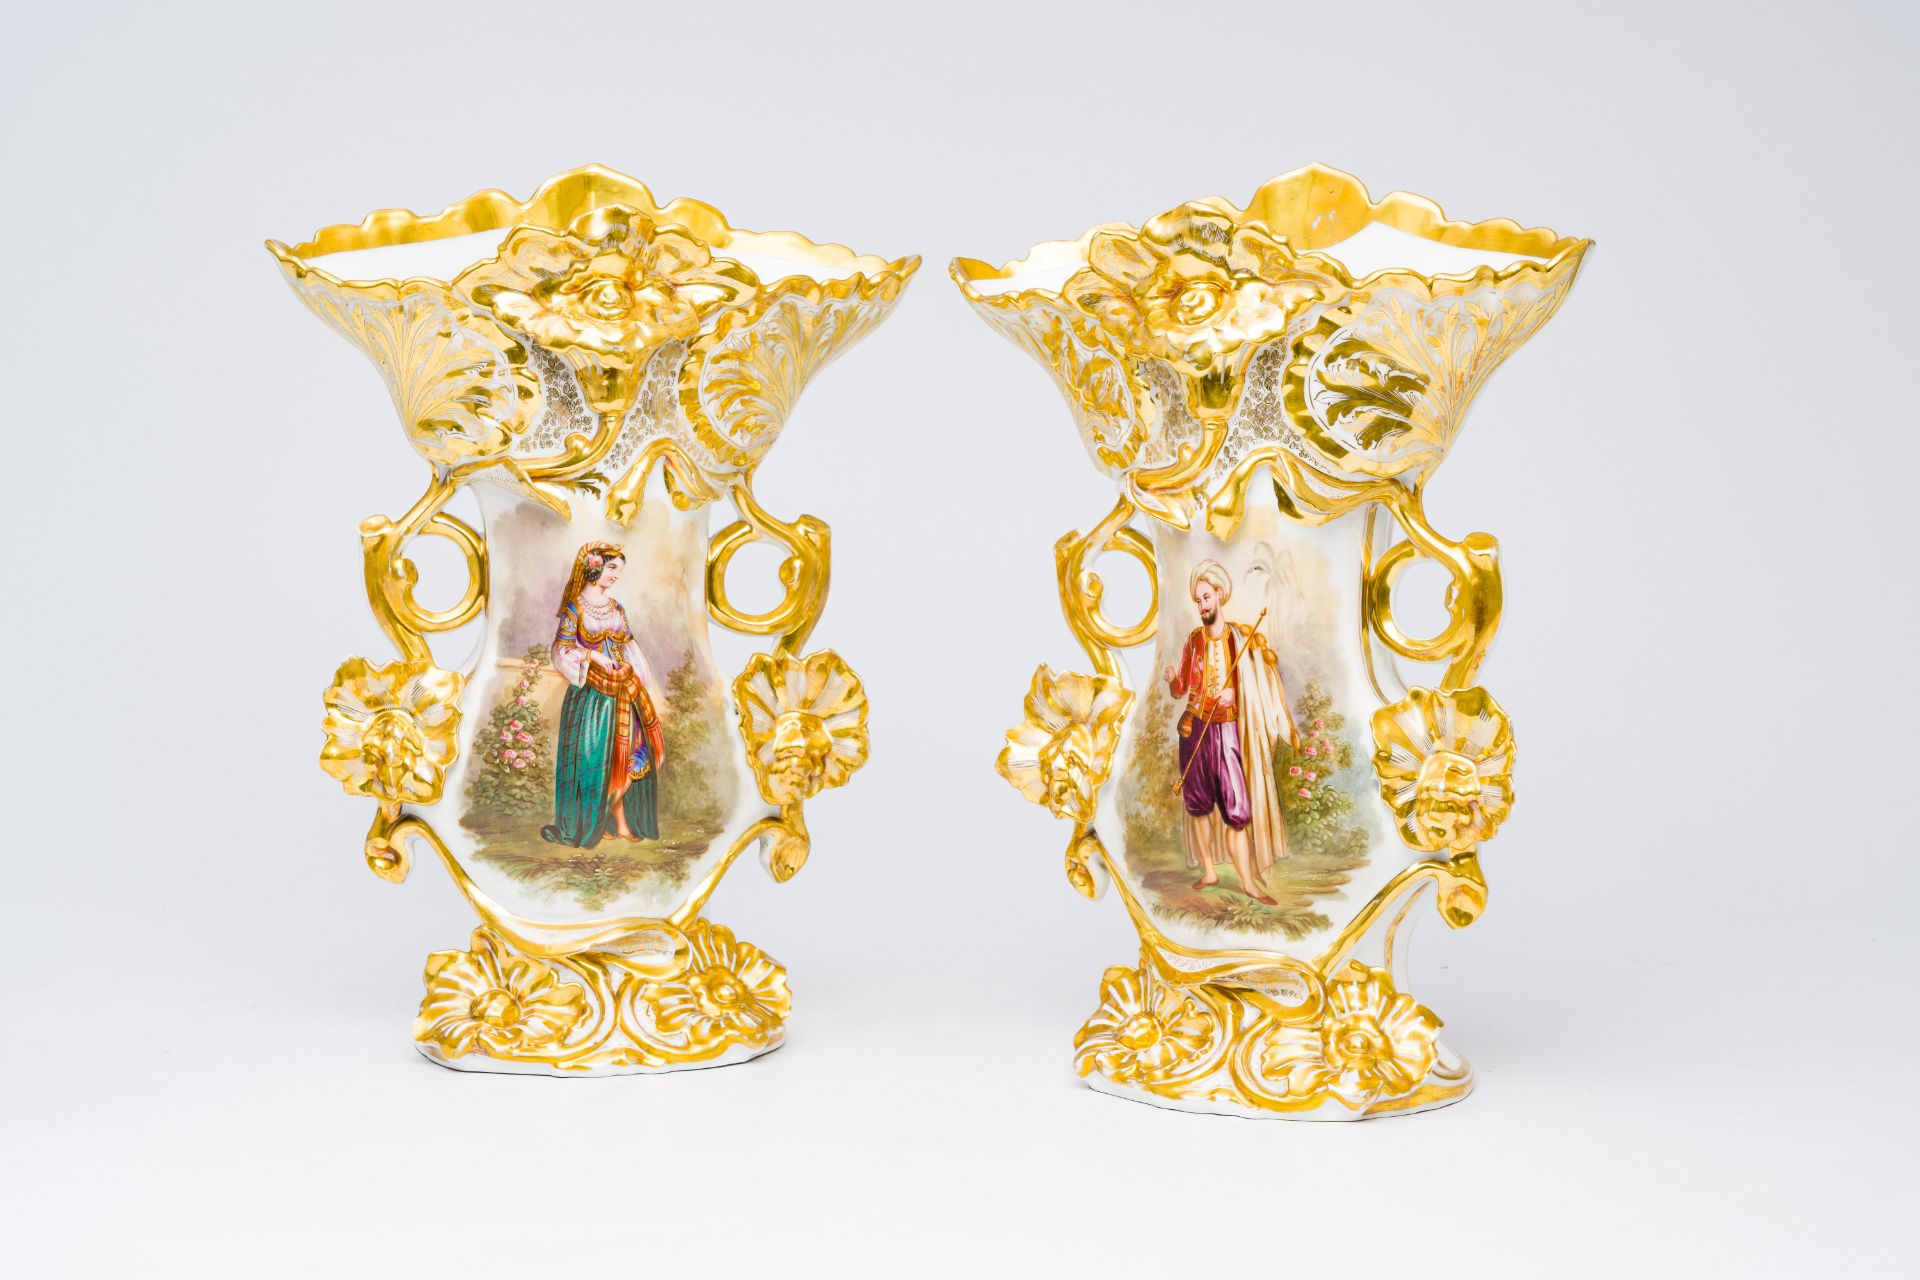 A pair of French gilt and polychrome old Paris porcelain vases with an Indian couple and floral reli